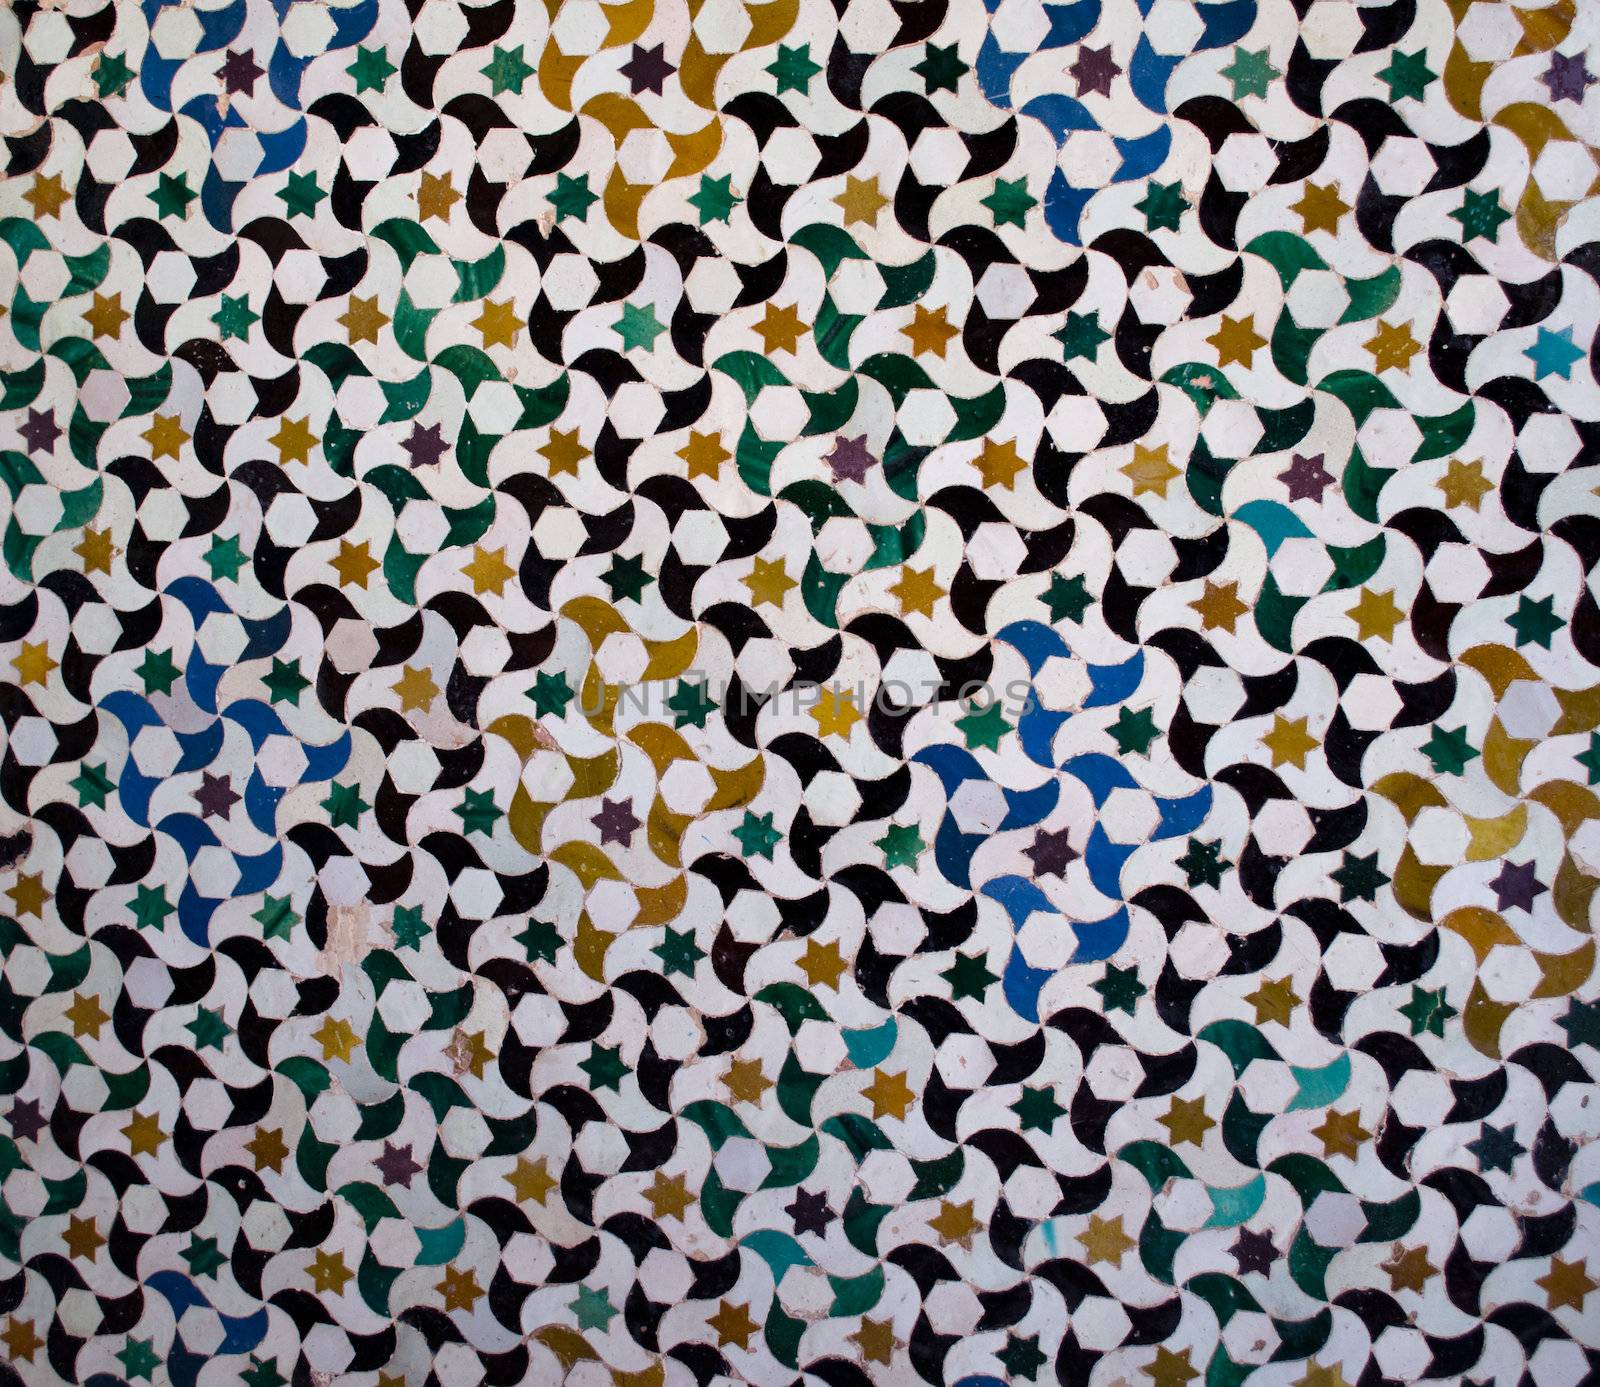 Pattern or texture of ceramic tiles mosaic found in the Alhambra, in Spain